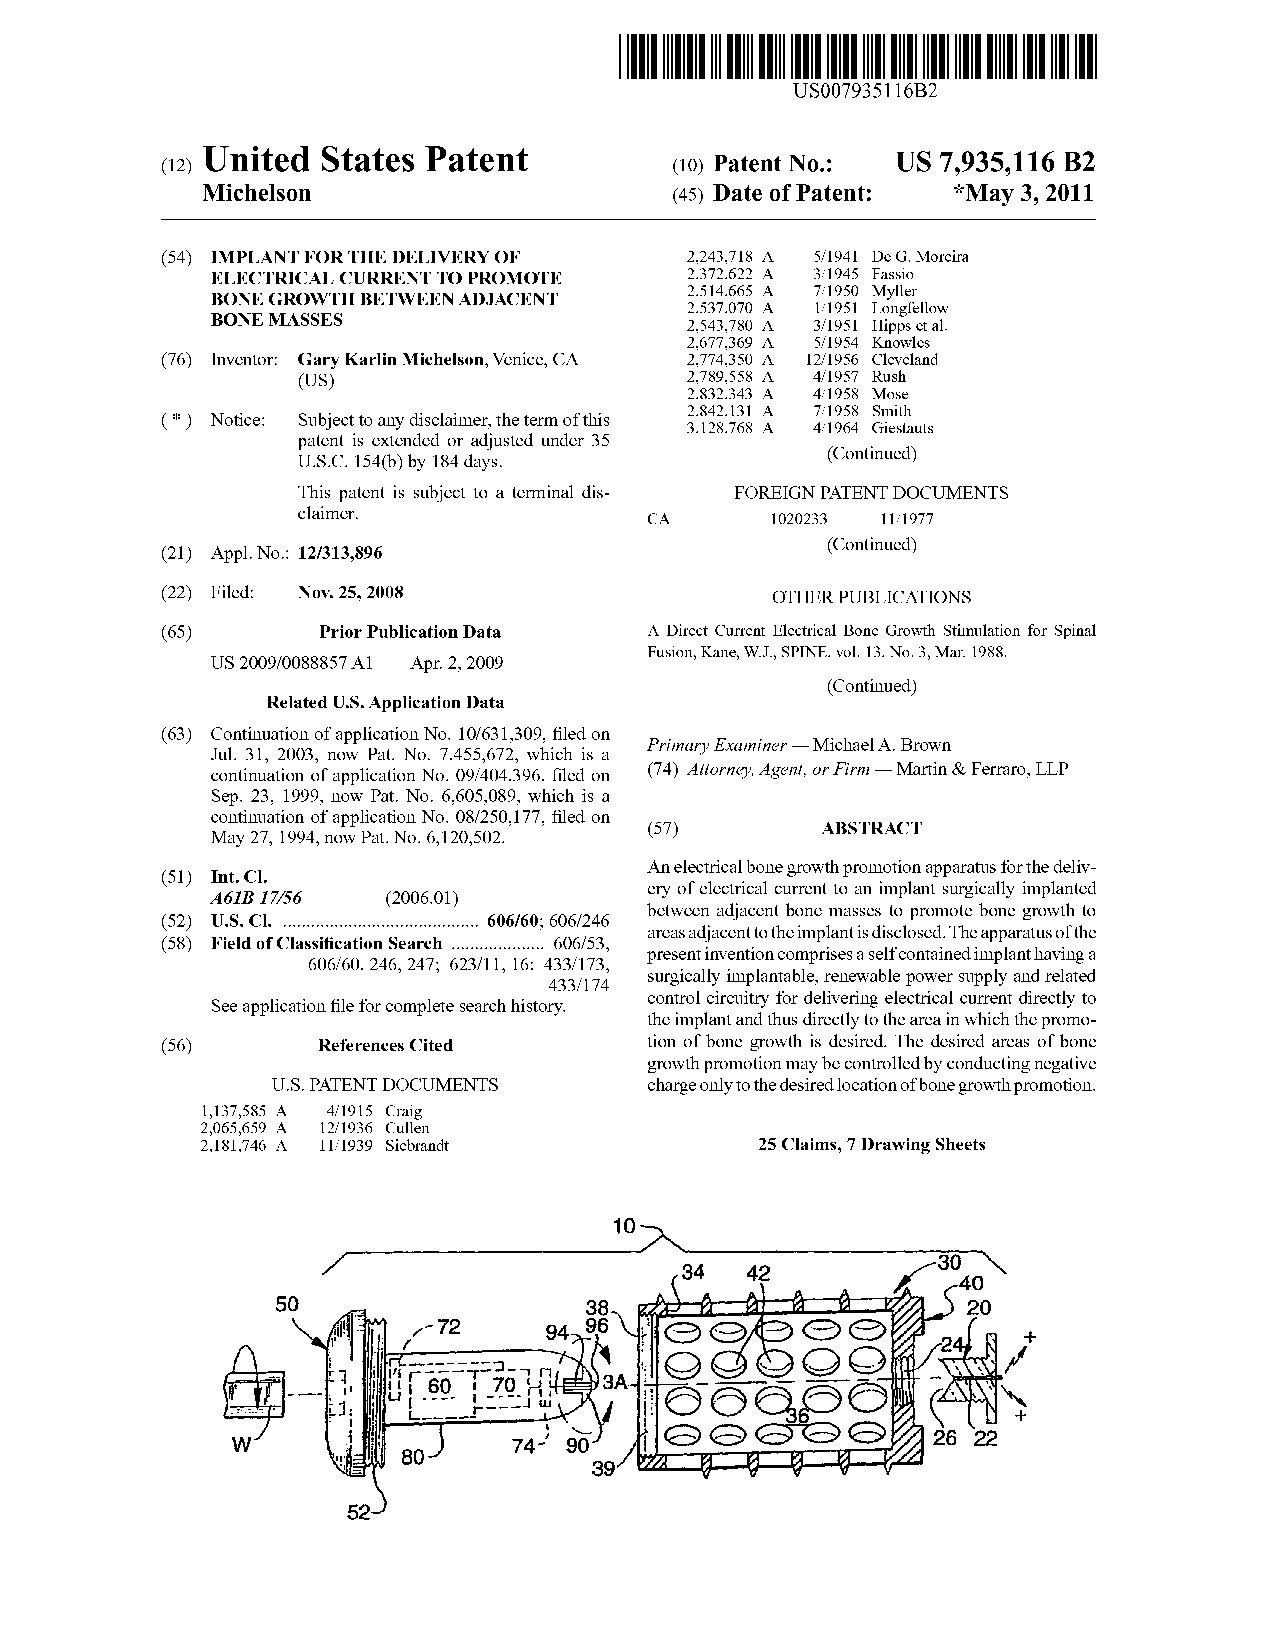 Implant for the delivery of electrical current to promote bone growth     between adjacent bone masses - Patent 7,935,116